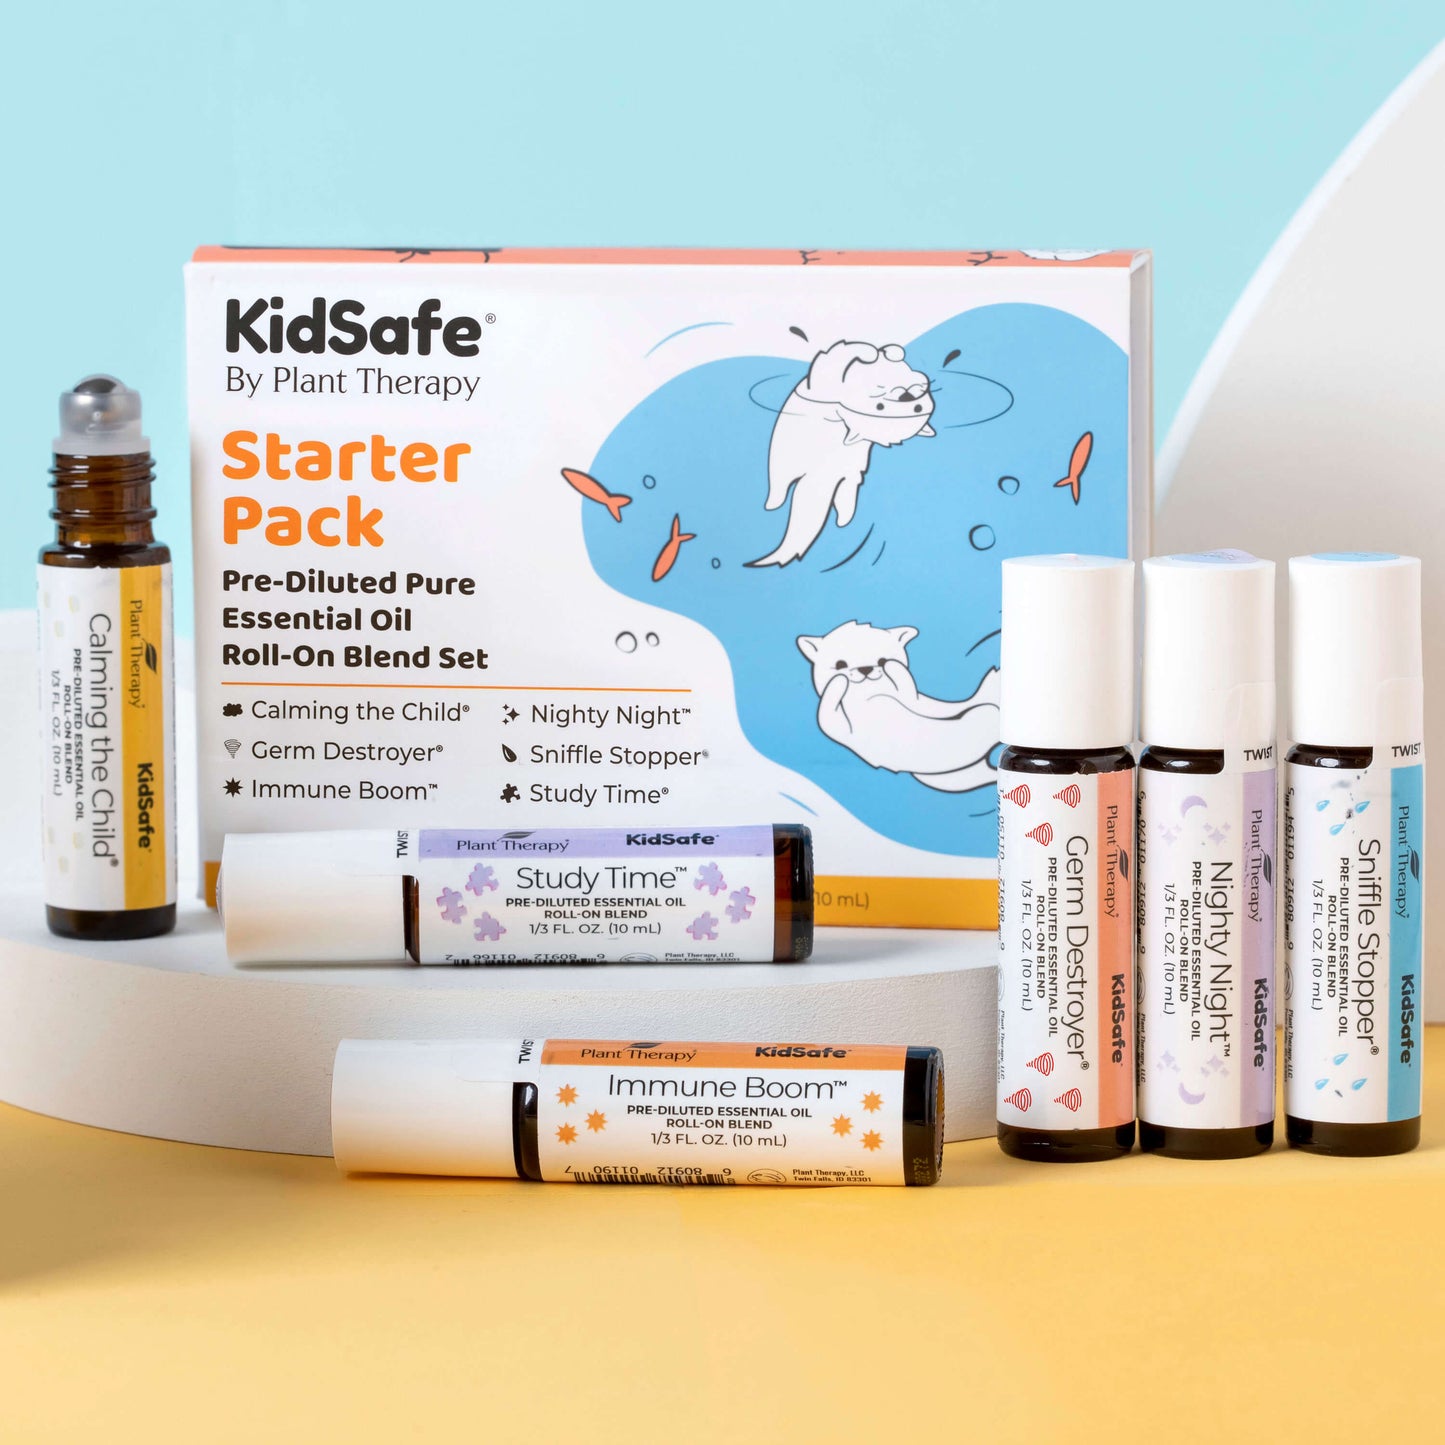 Image of KidSafe Essential Oil Starter Pack Roll-On with bottles and box